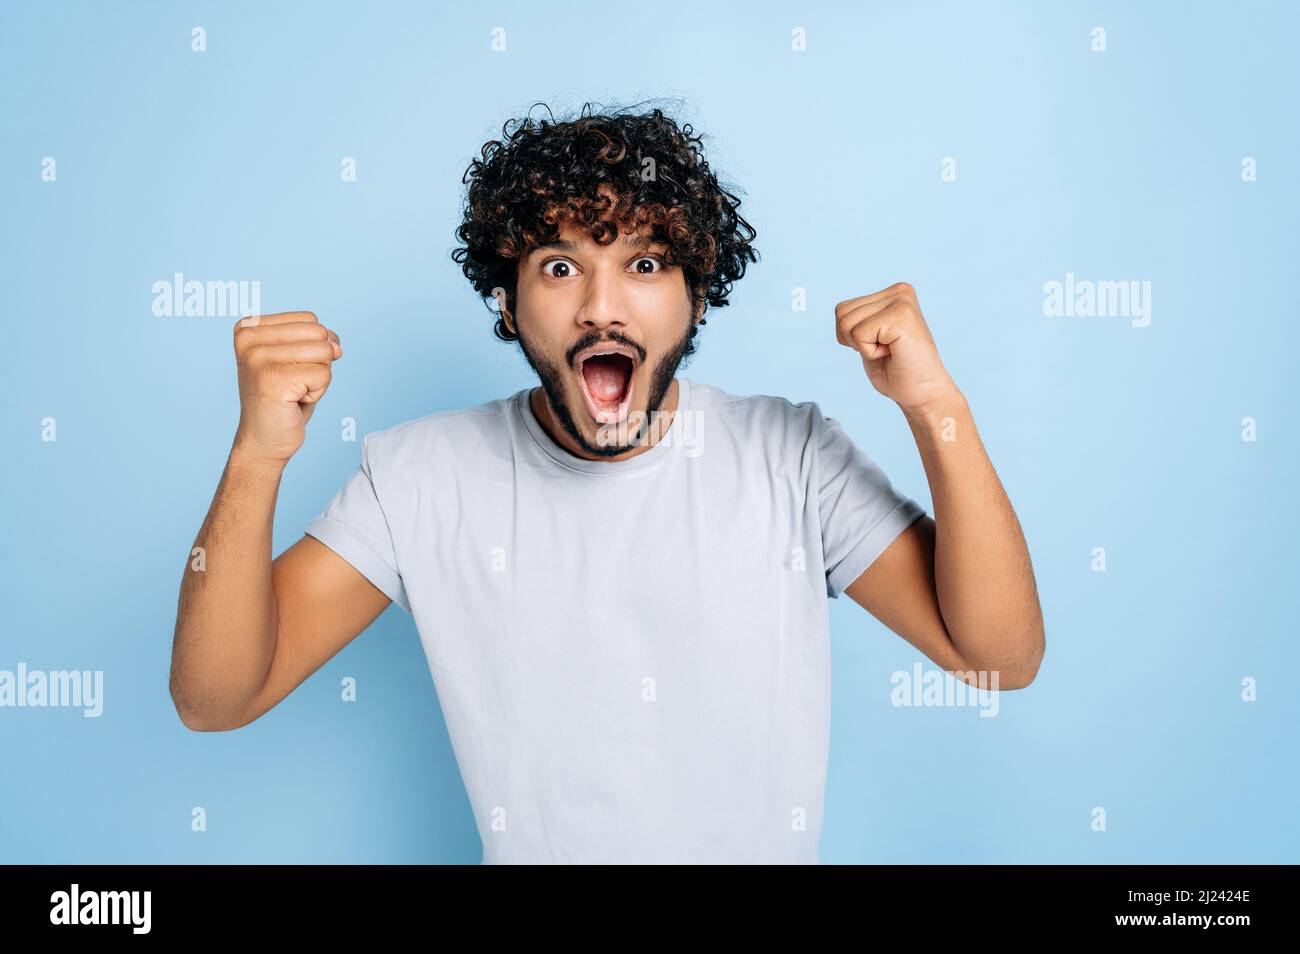 Enthusiastic amazed indian or arabic guy, in abasic t-shirt, rejoices in success, victory, win, gesturing with fists, looking at the camera, smiling, standing on an isolated blue background Stock Photo